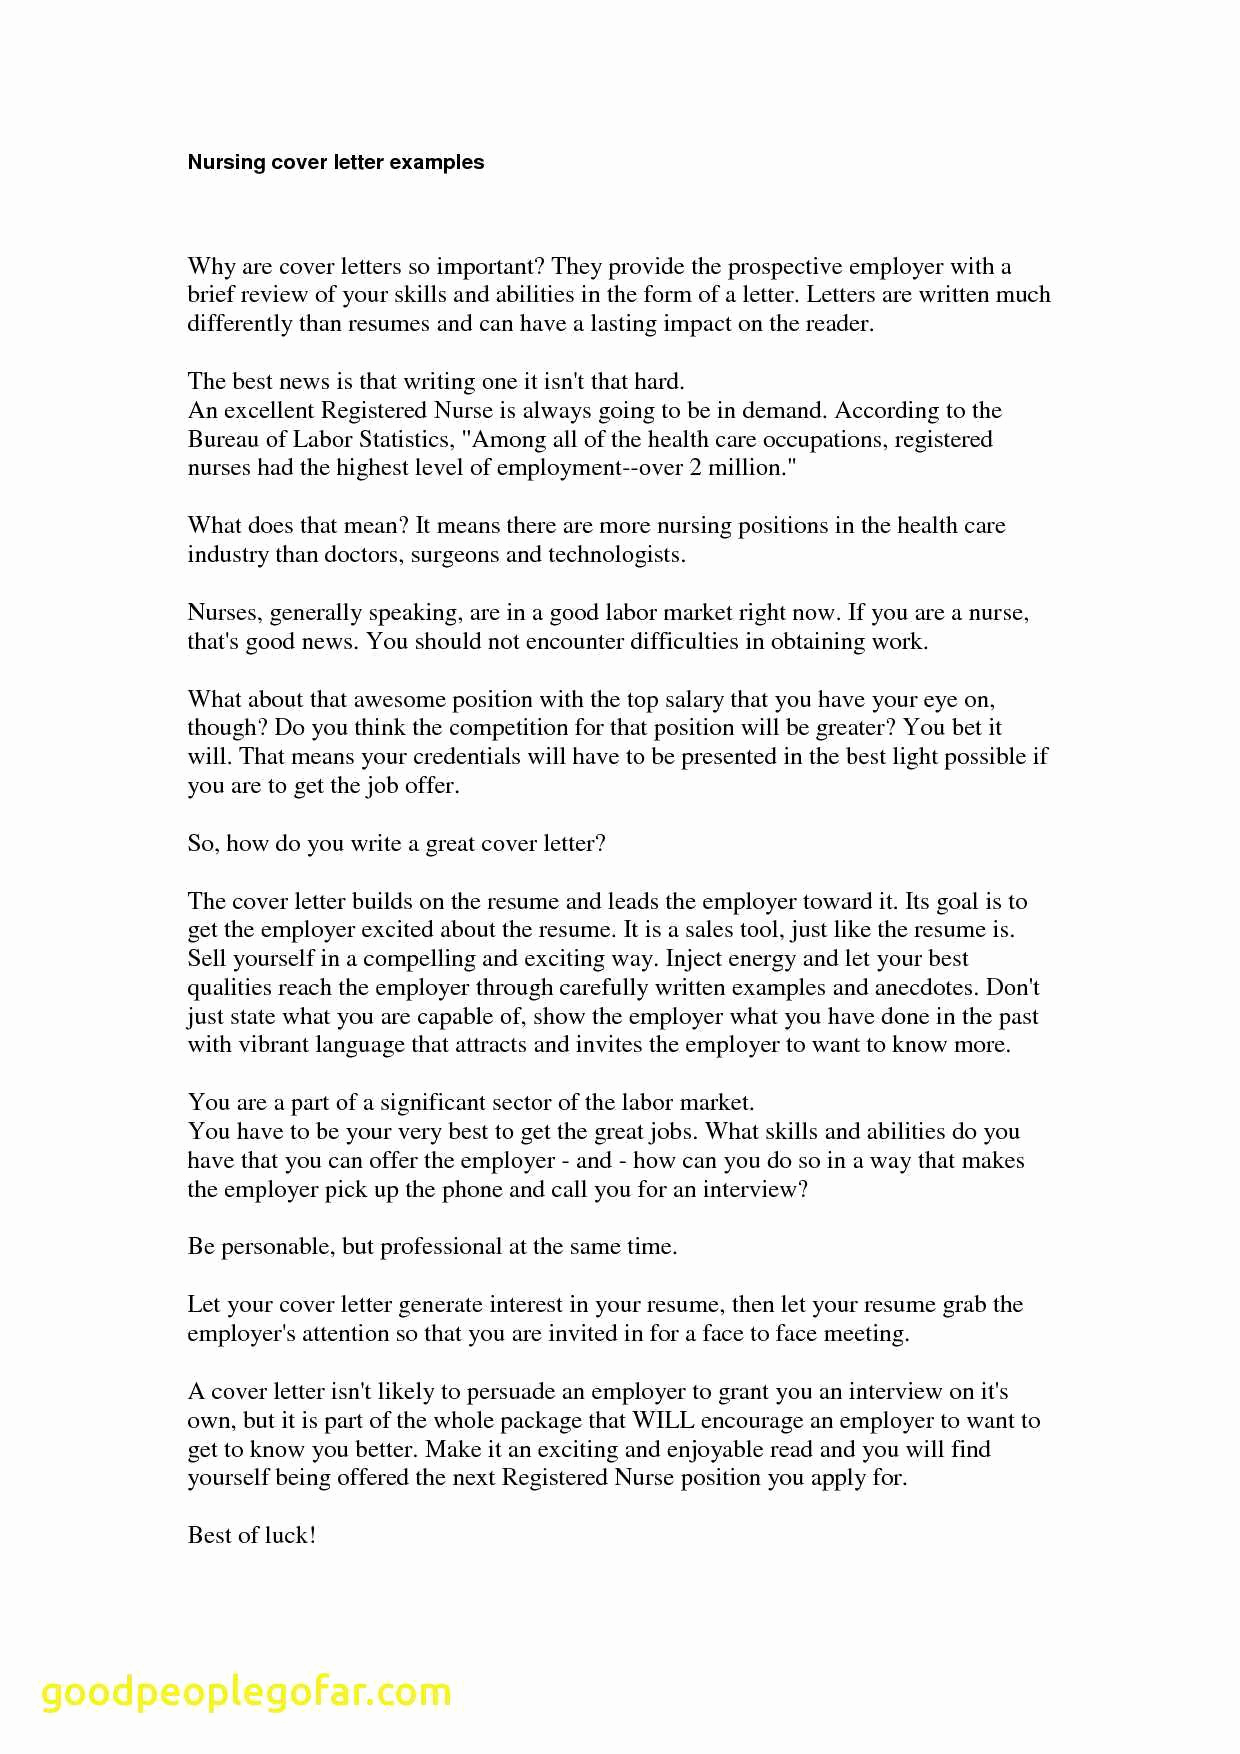 Professional Proposal Letter Template - Proposals Graphics and Cover Letters T